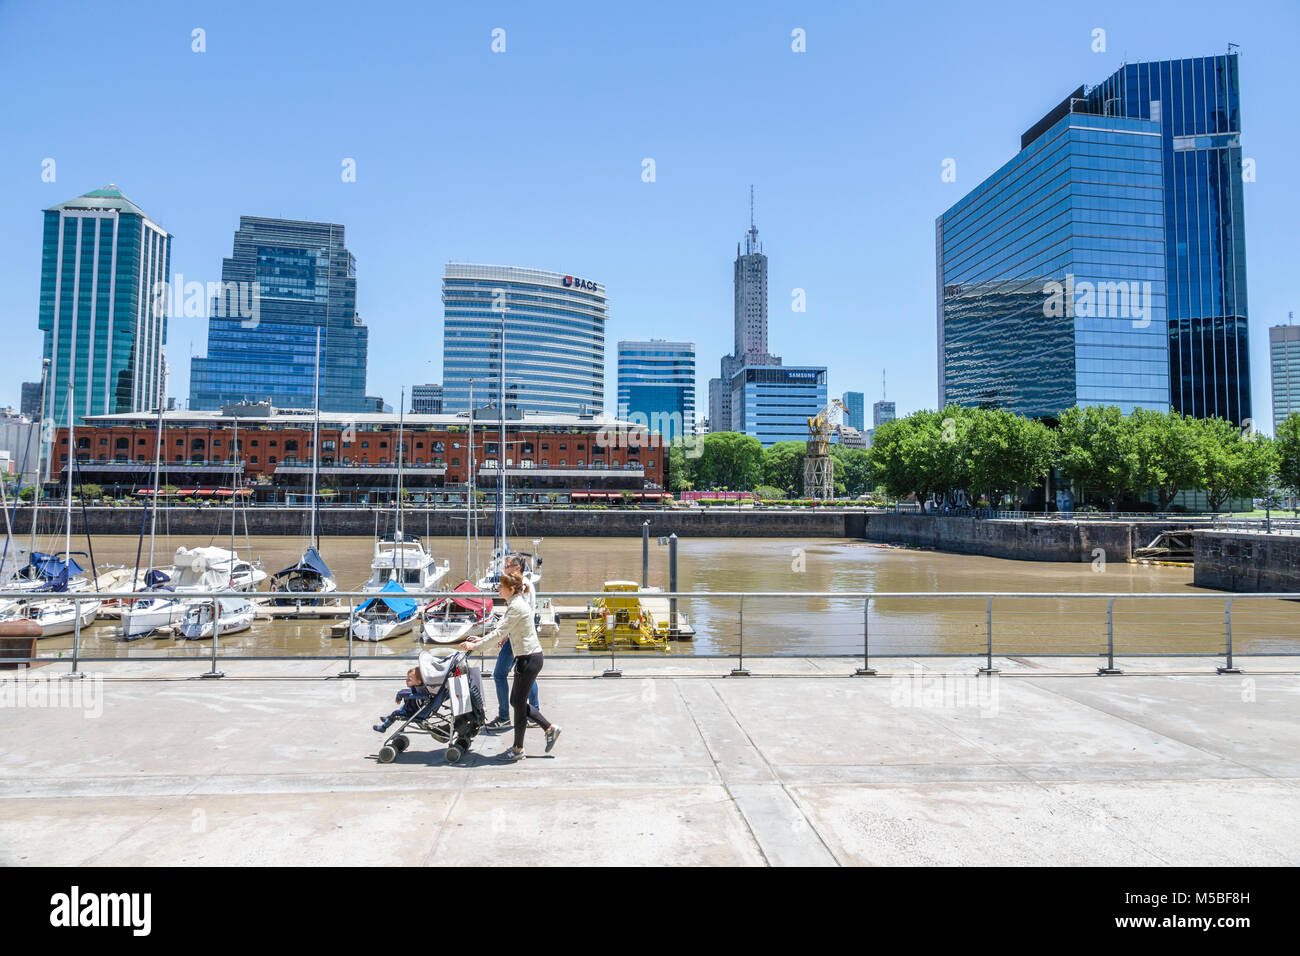 Buenos Aires Argentina,Puerto Madero,Rio Dique,water,riverfront,city skyline,buildings,Hispanic,woman female women,man men male,pushing stroller,ARG17 Stock Photo